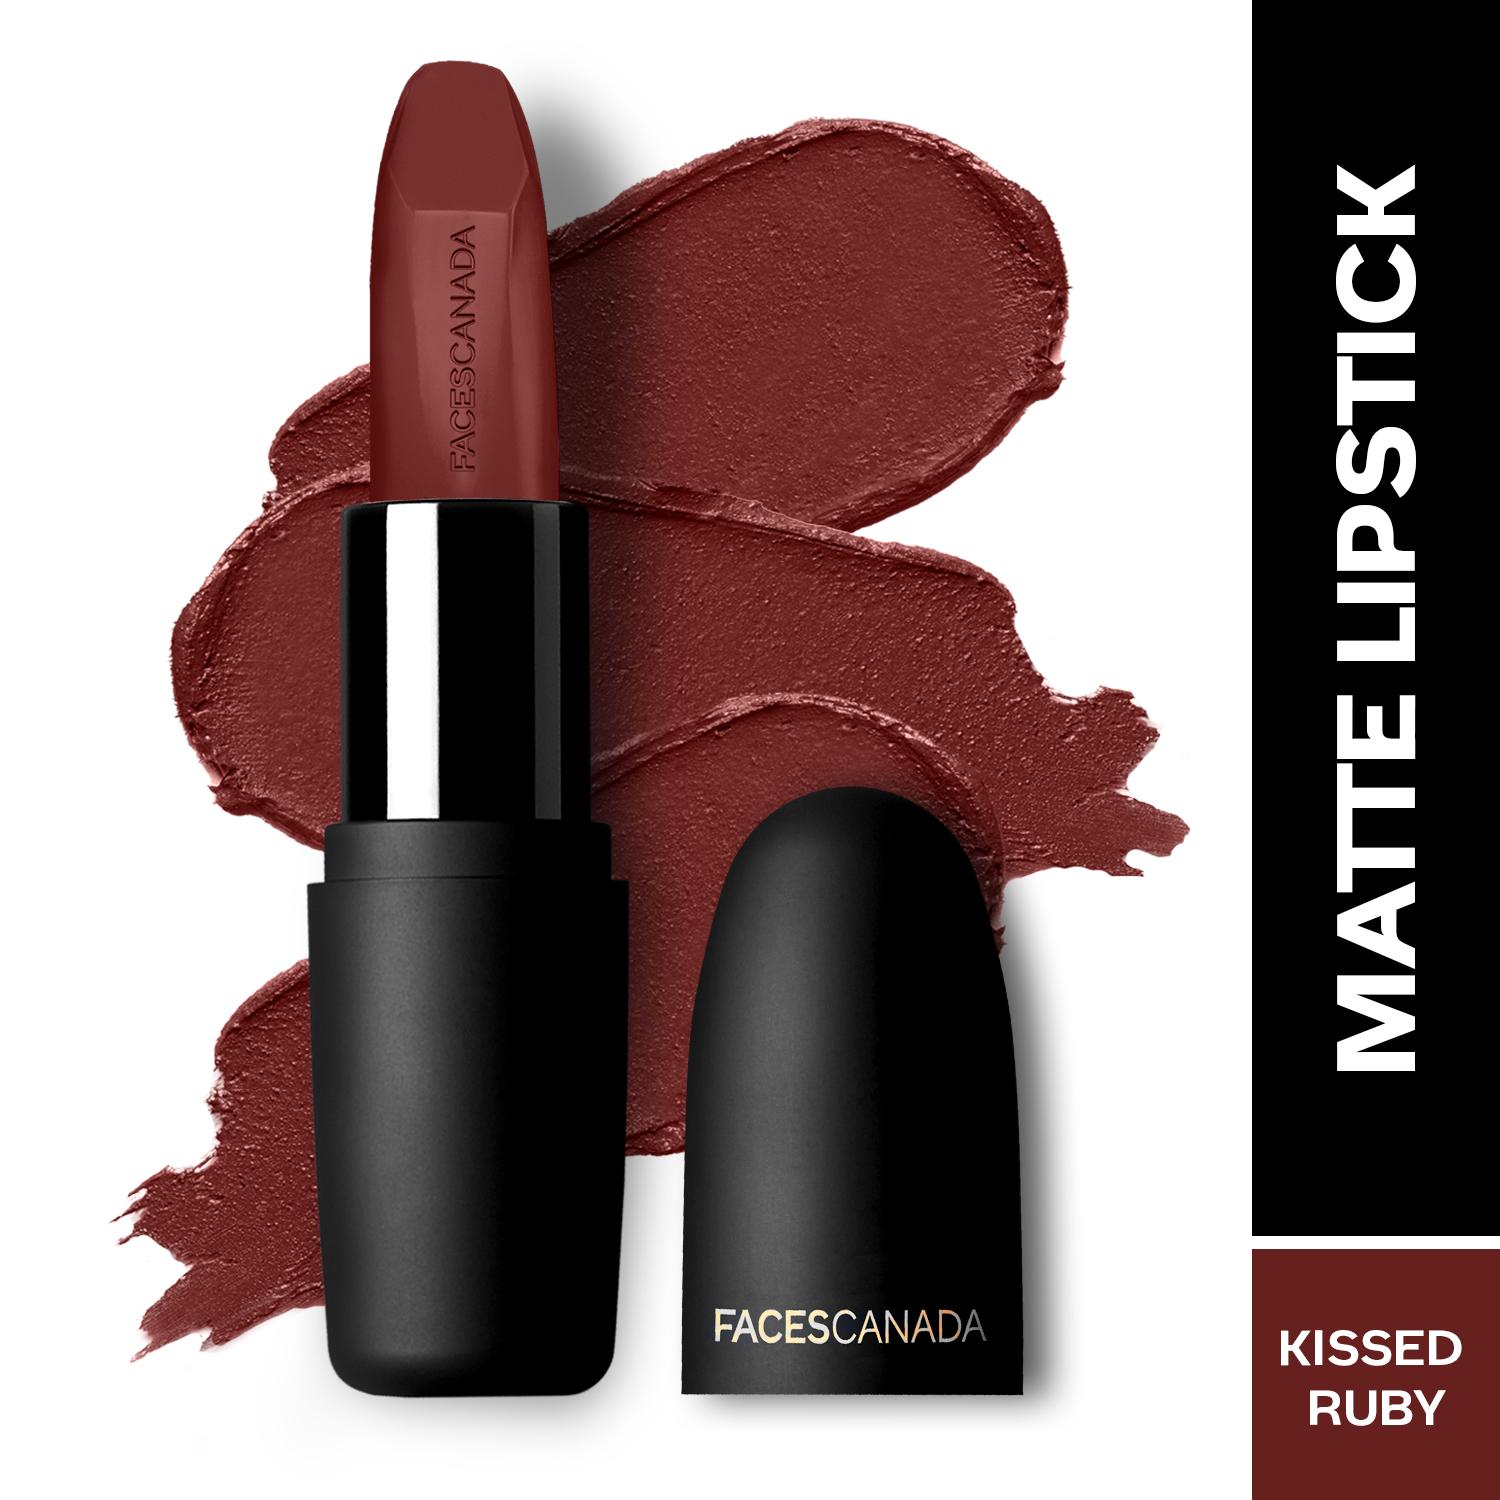 Faces Canada Weightless Matte Lipstick, Pigmented and Hydrated Lips - Kissed Ruby 13 (4.5 g)